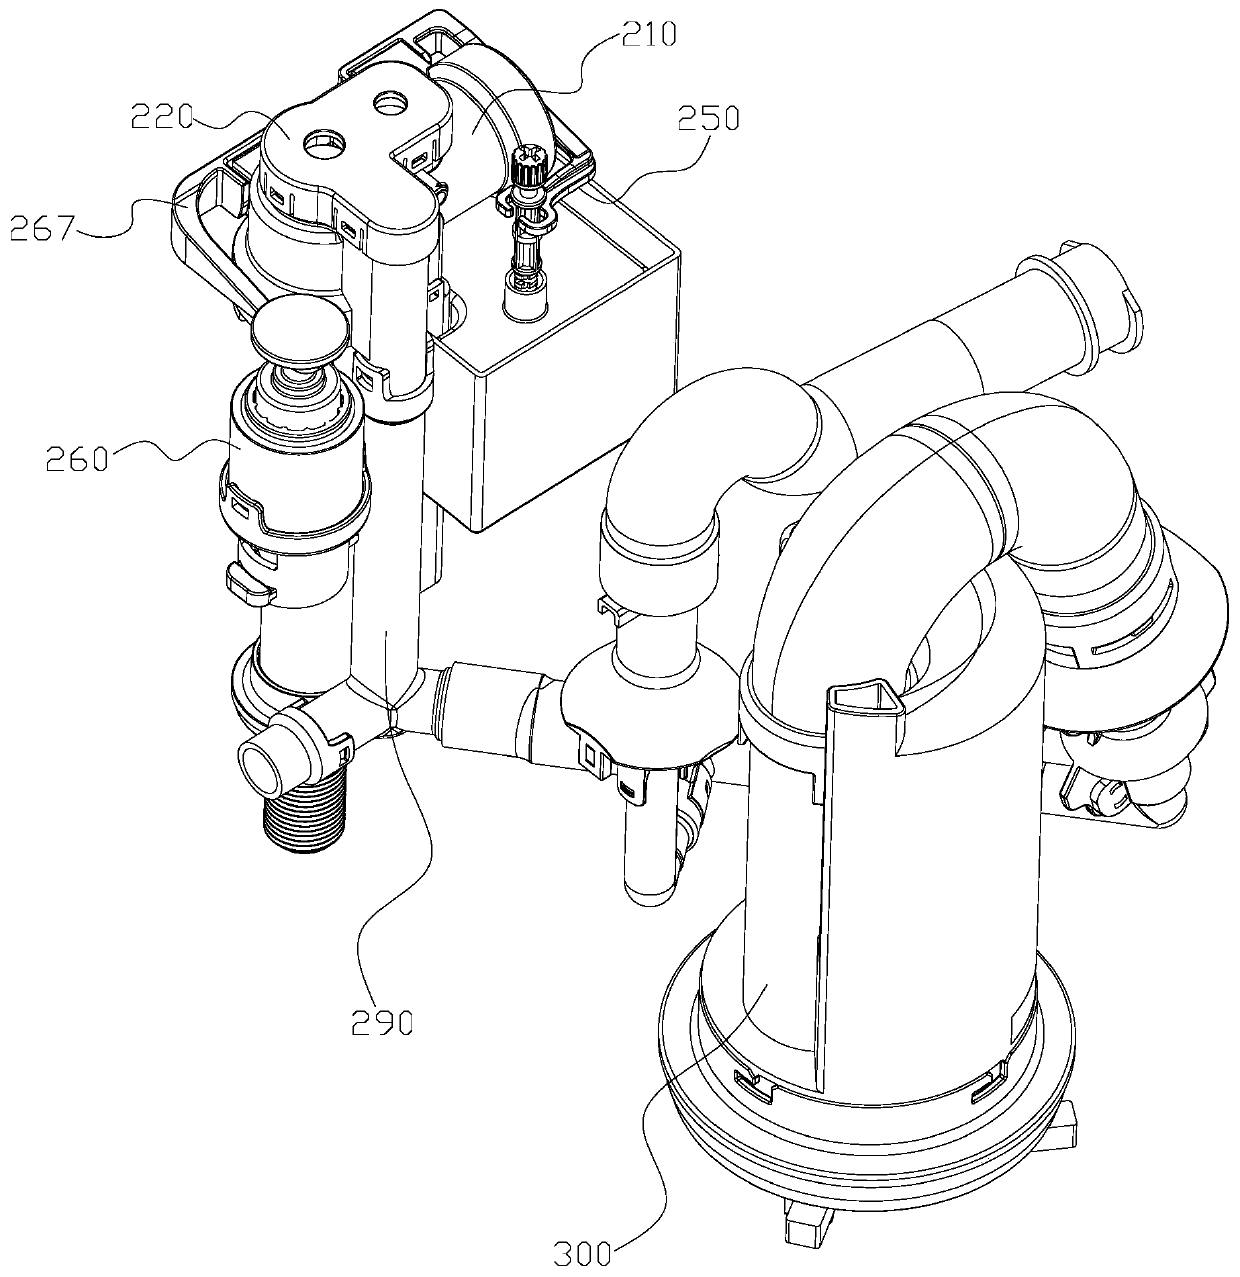 Water inlet valve and toilet flushing system with same